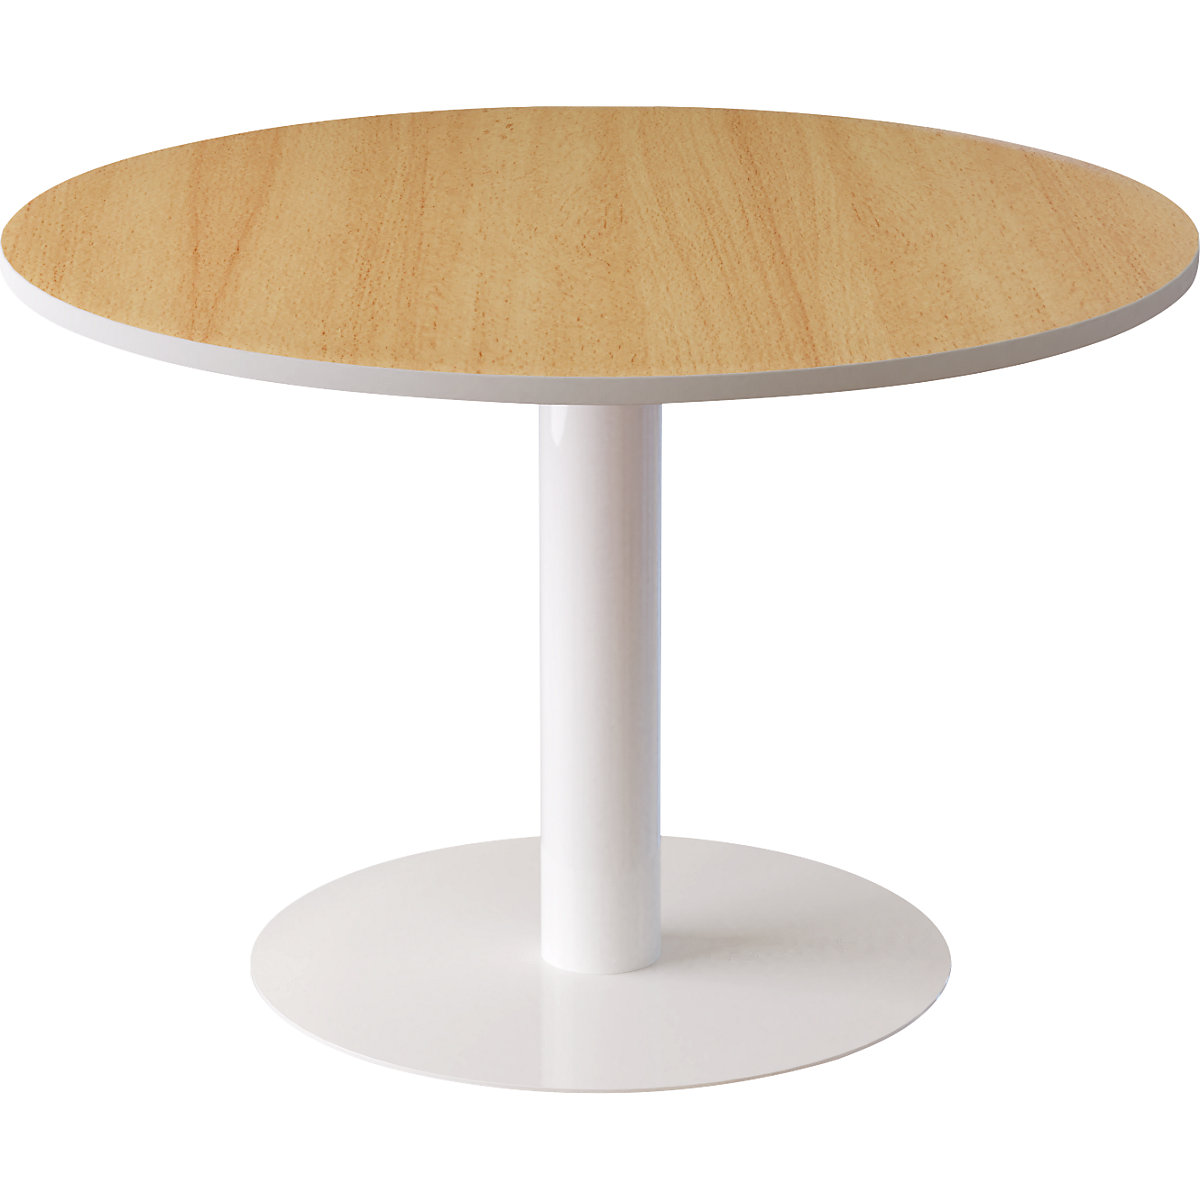 Conference table, Ø 1150 mm